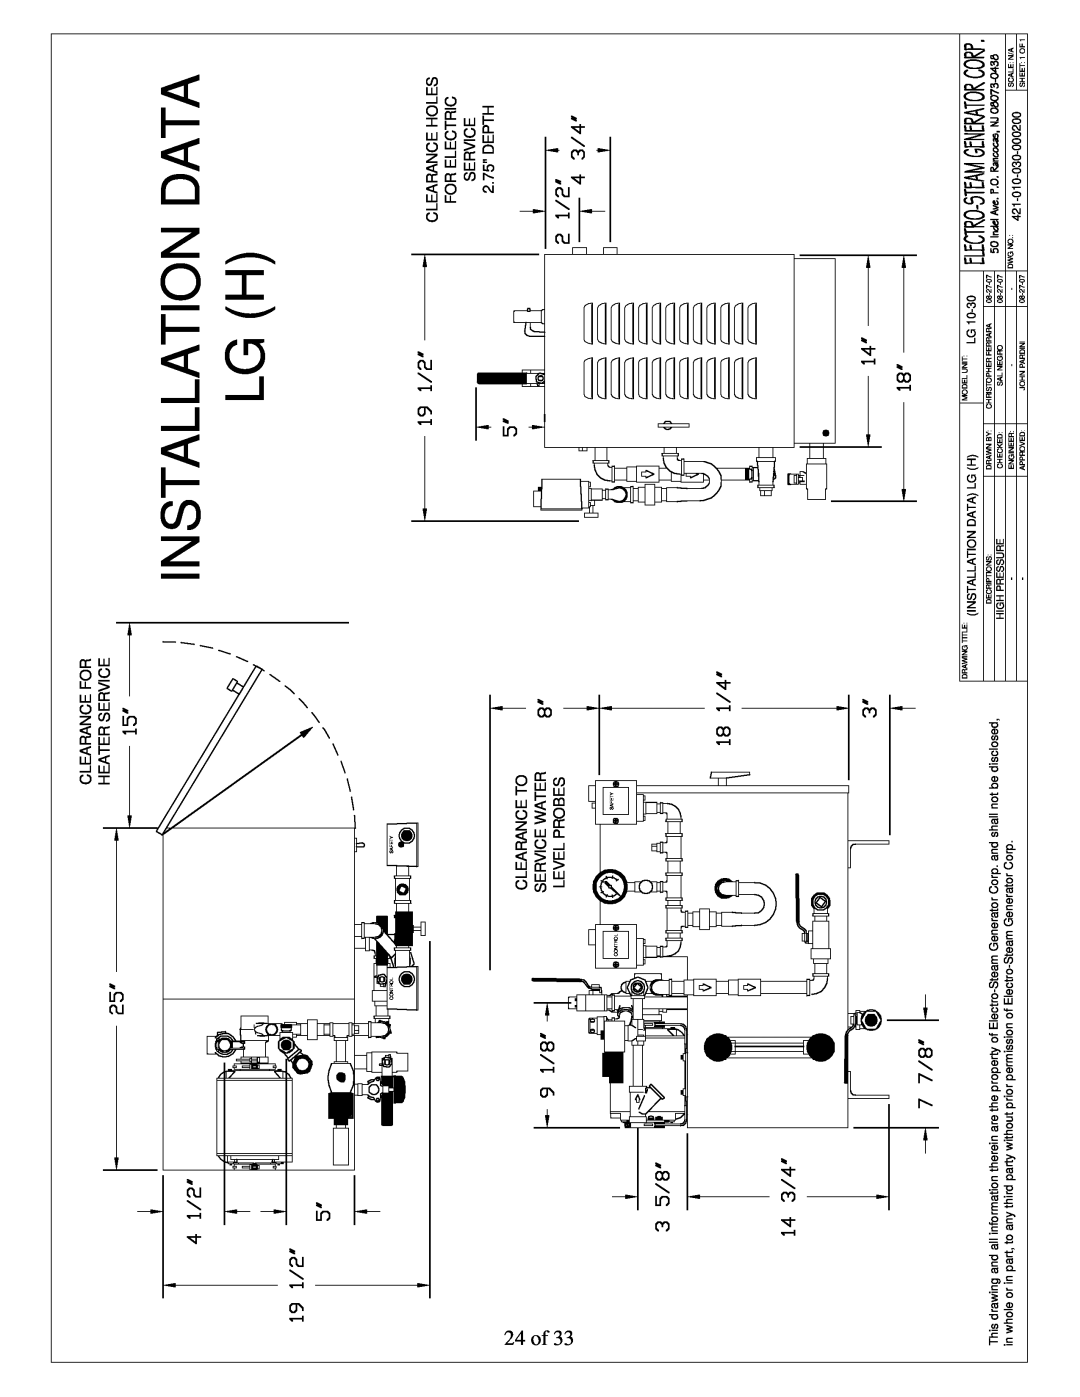 LG Electronics 30, 10 user manual Installation Data Lg H, 24 of, Clearance For Heater Service 